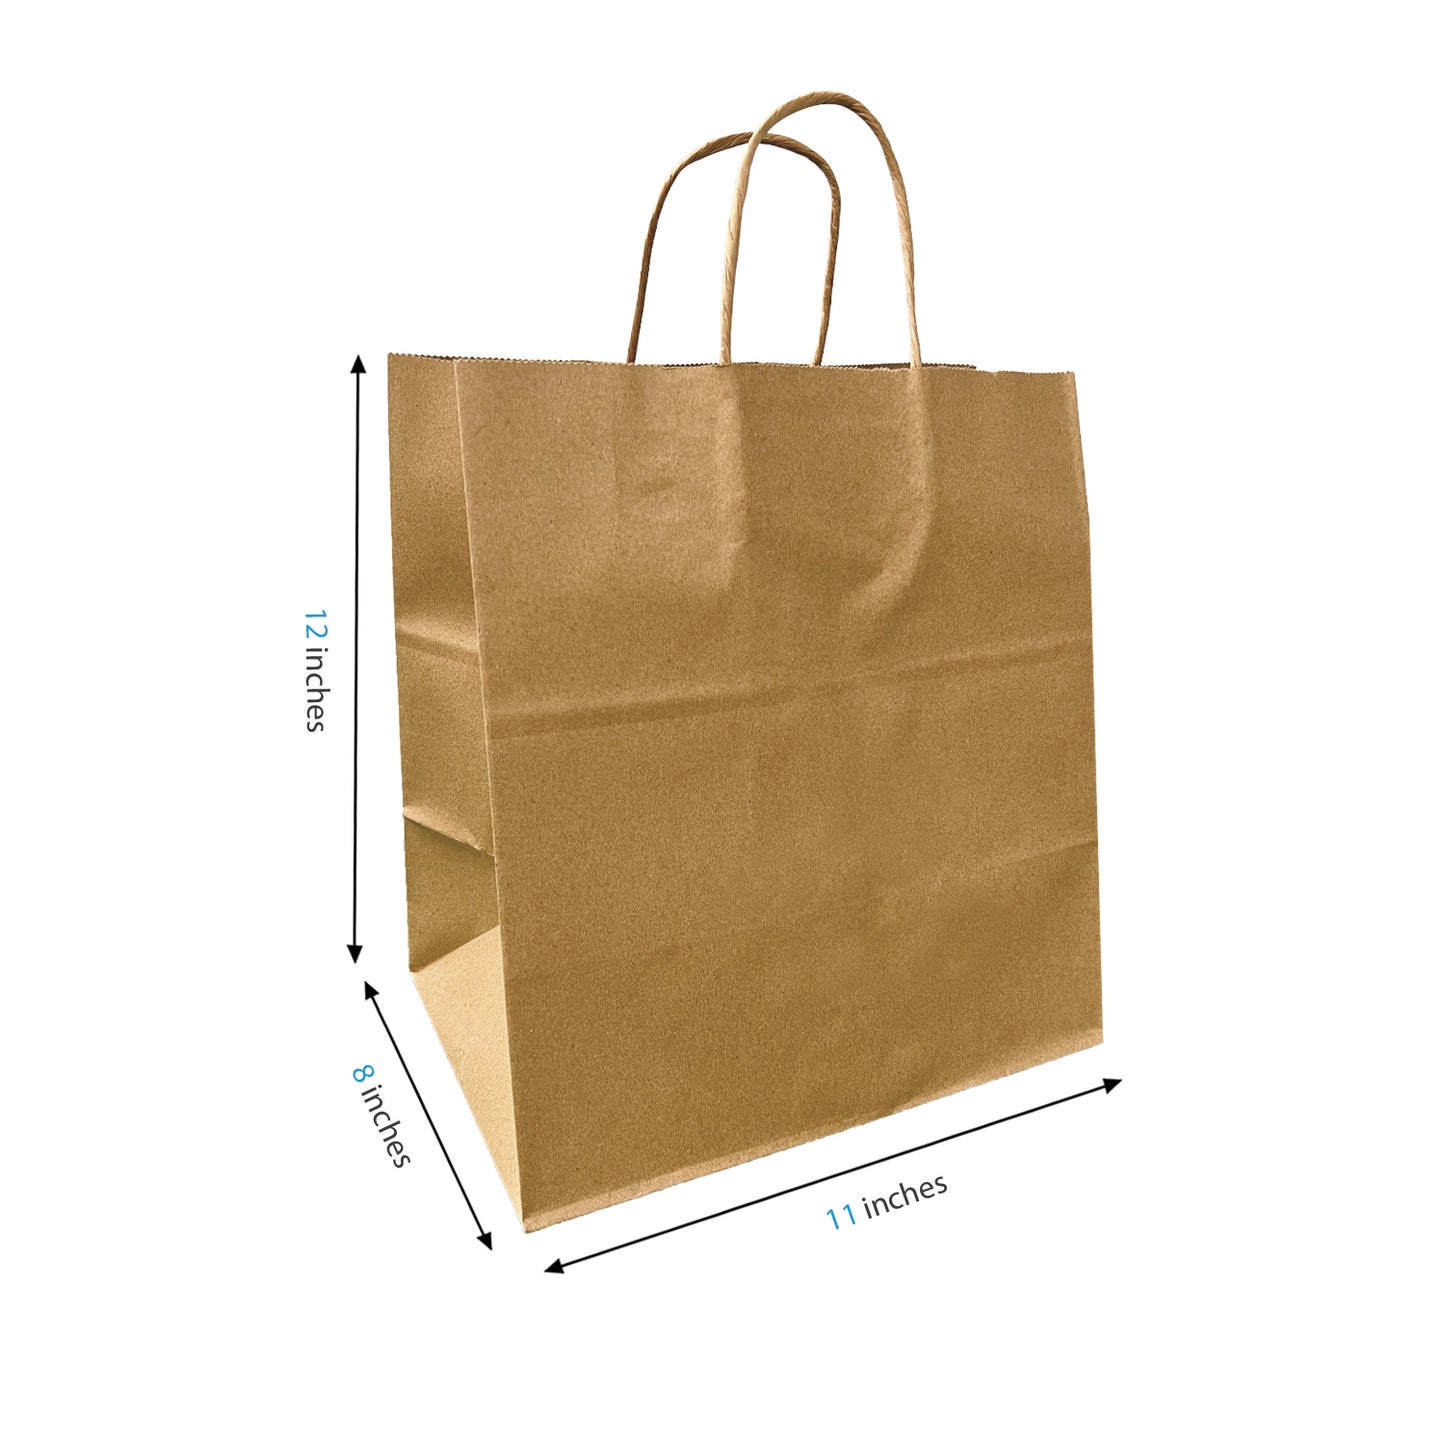 200pcs Cafe 11x8x12 inches Kraft Paper Bag Cardboard Insert with Twisted Handles, $0.50/pc